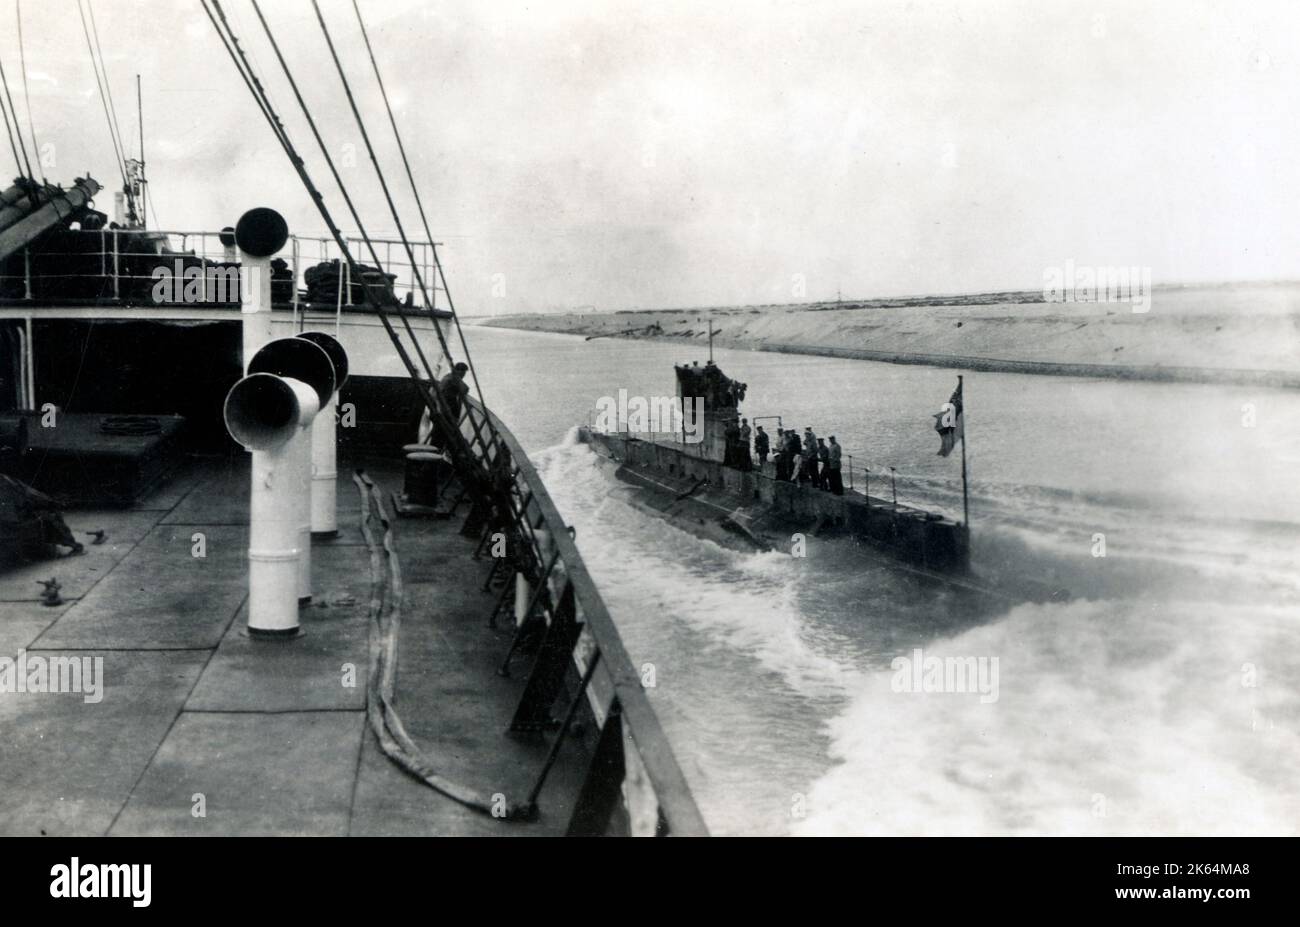 British E-class submarine viewed from another Naval vessel. The E class served with the Royal Navy throughout World War I as the backbone of the submarine fleet. The last surviving E class submarines were withdrawn from service by 1922. Stock Photo